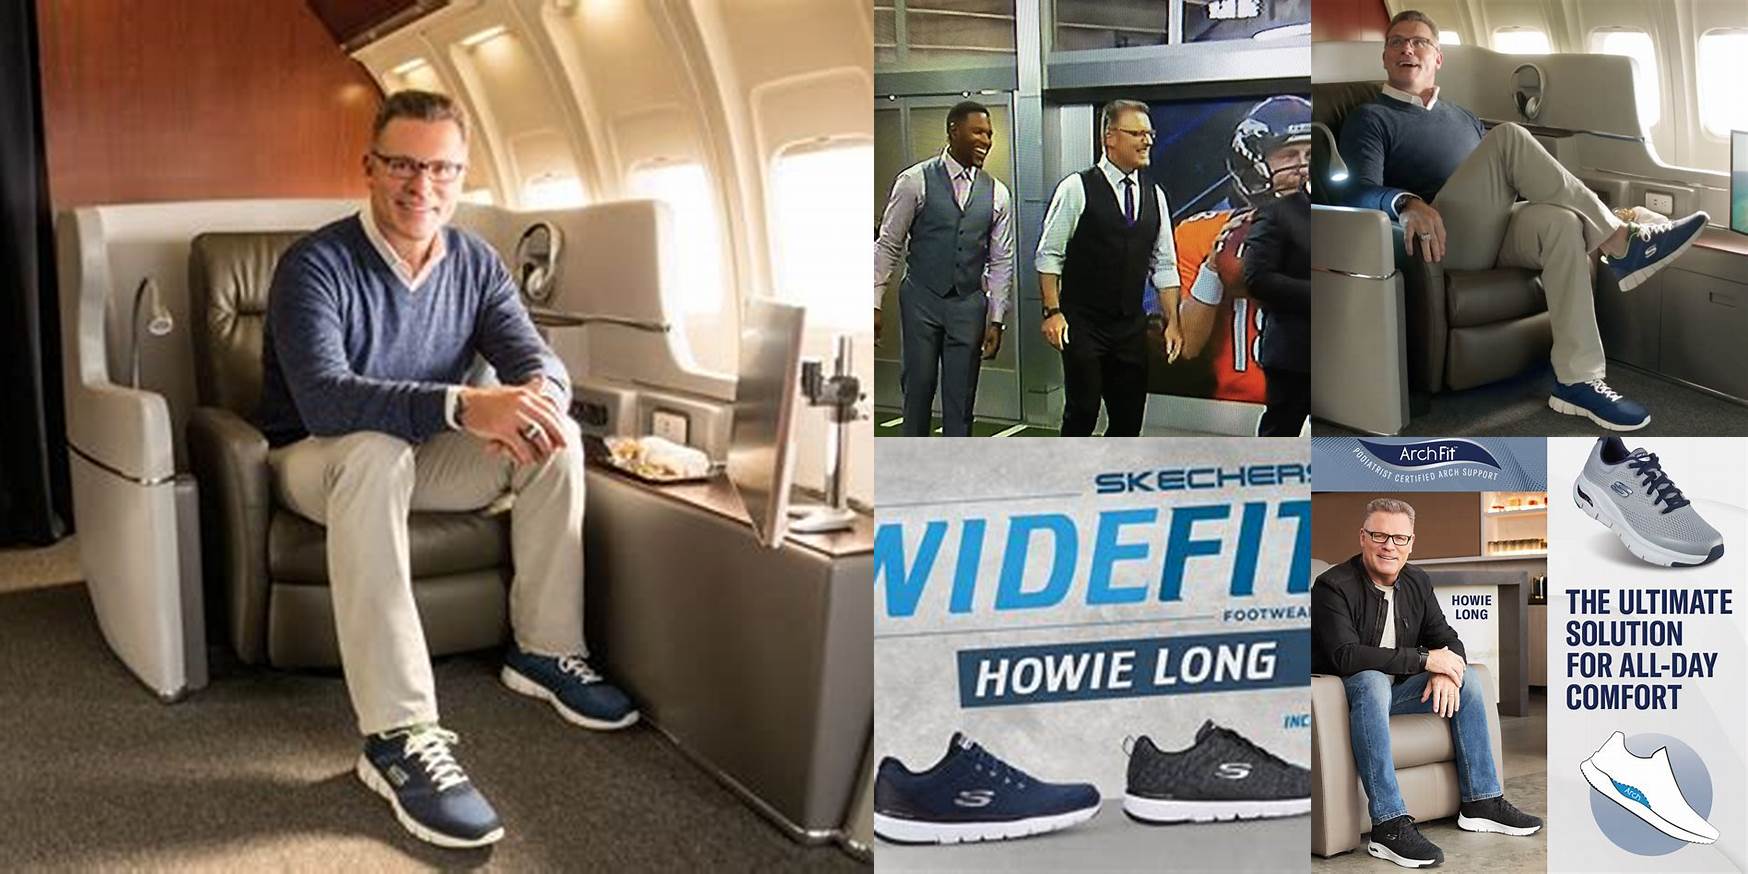 What Shoes Does Howie Long Wear